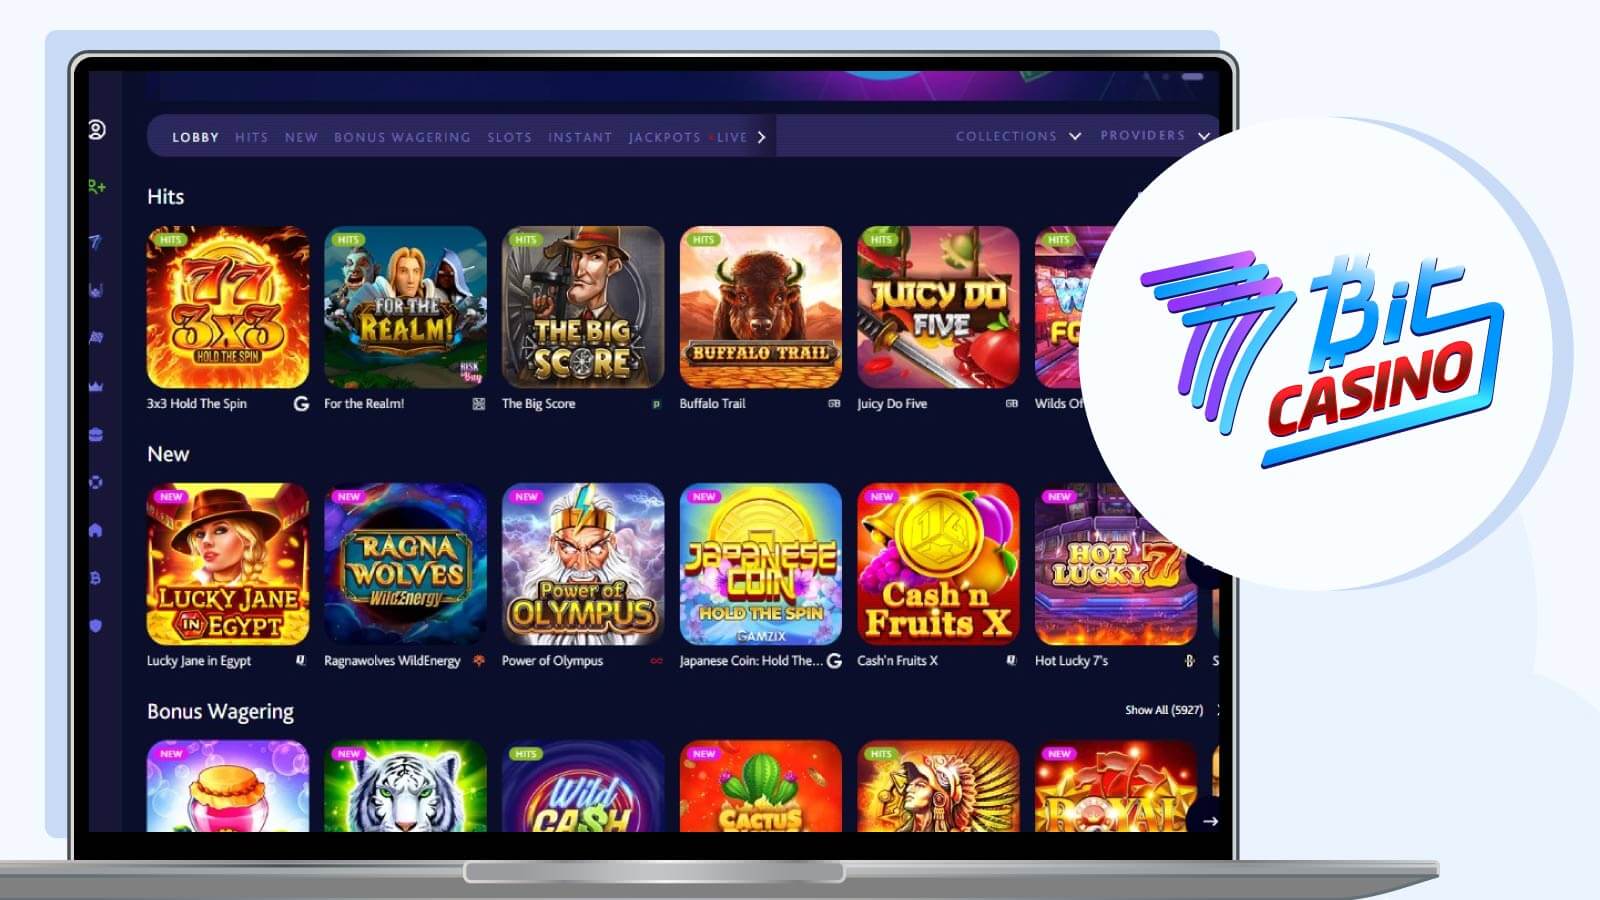 Best-Payout-Live-Games-at-7Bit-Casino